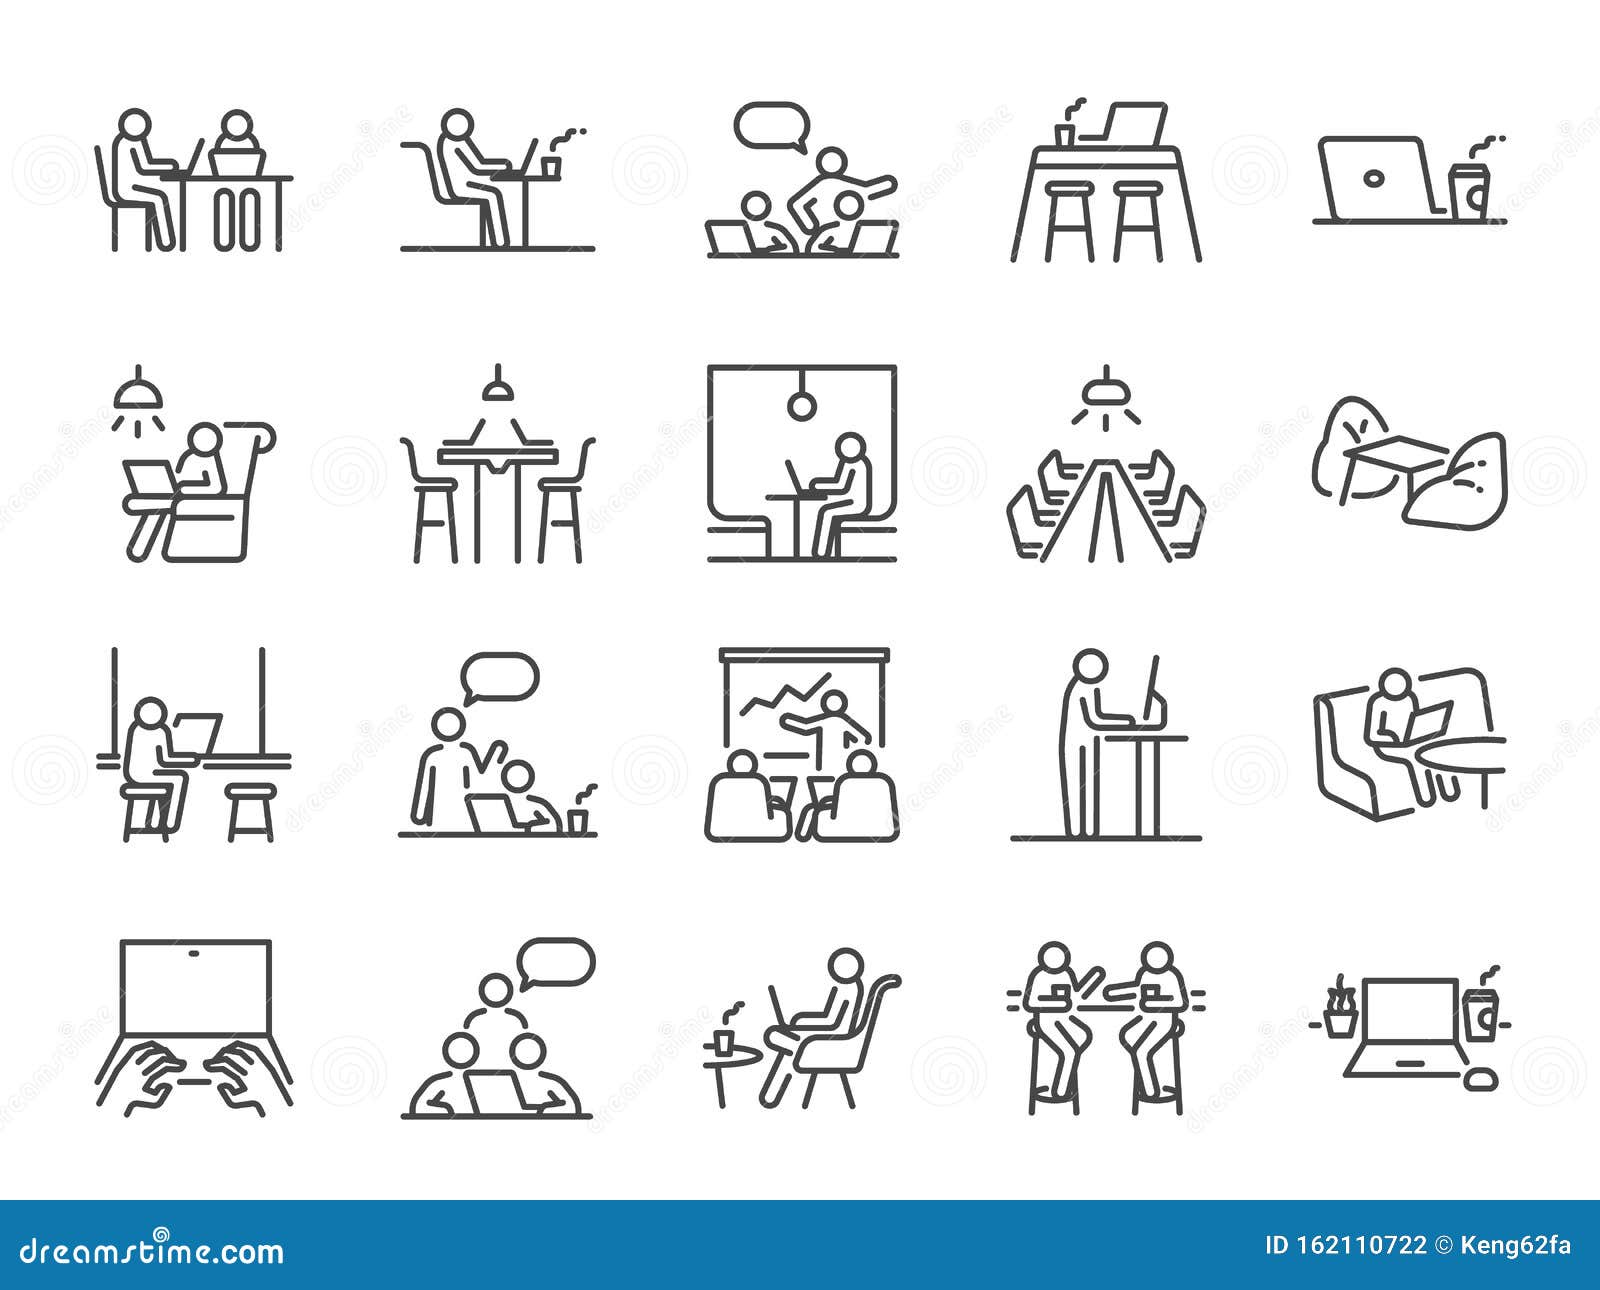 co-working space line icon set. included icons as coworkers, coworking, sharing office, business, company, work and more.